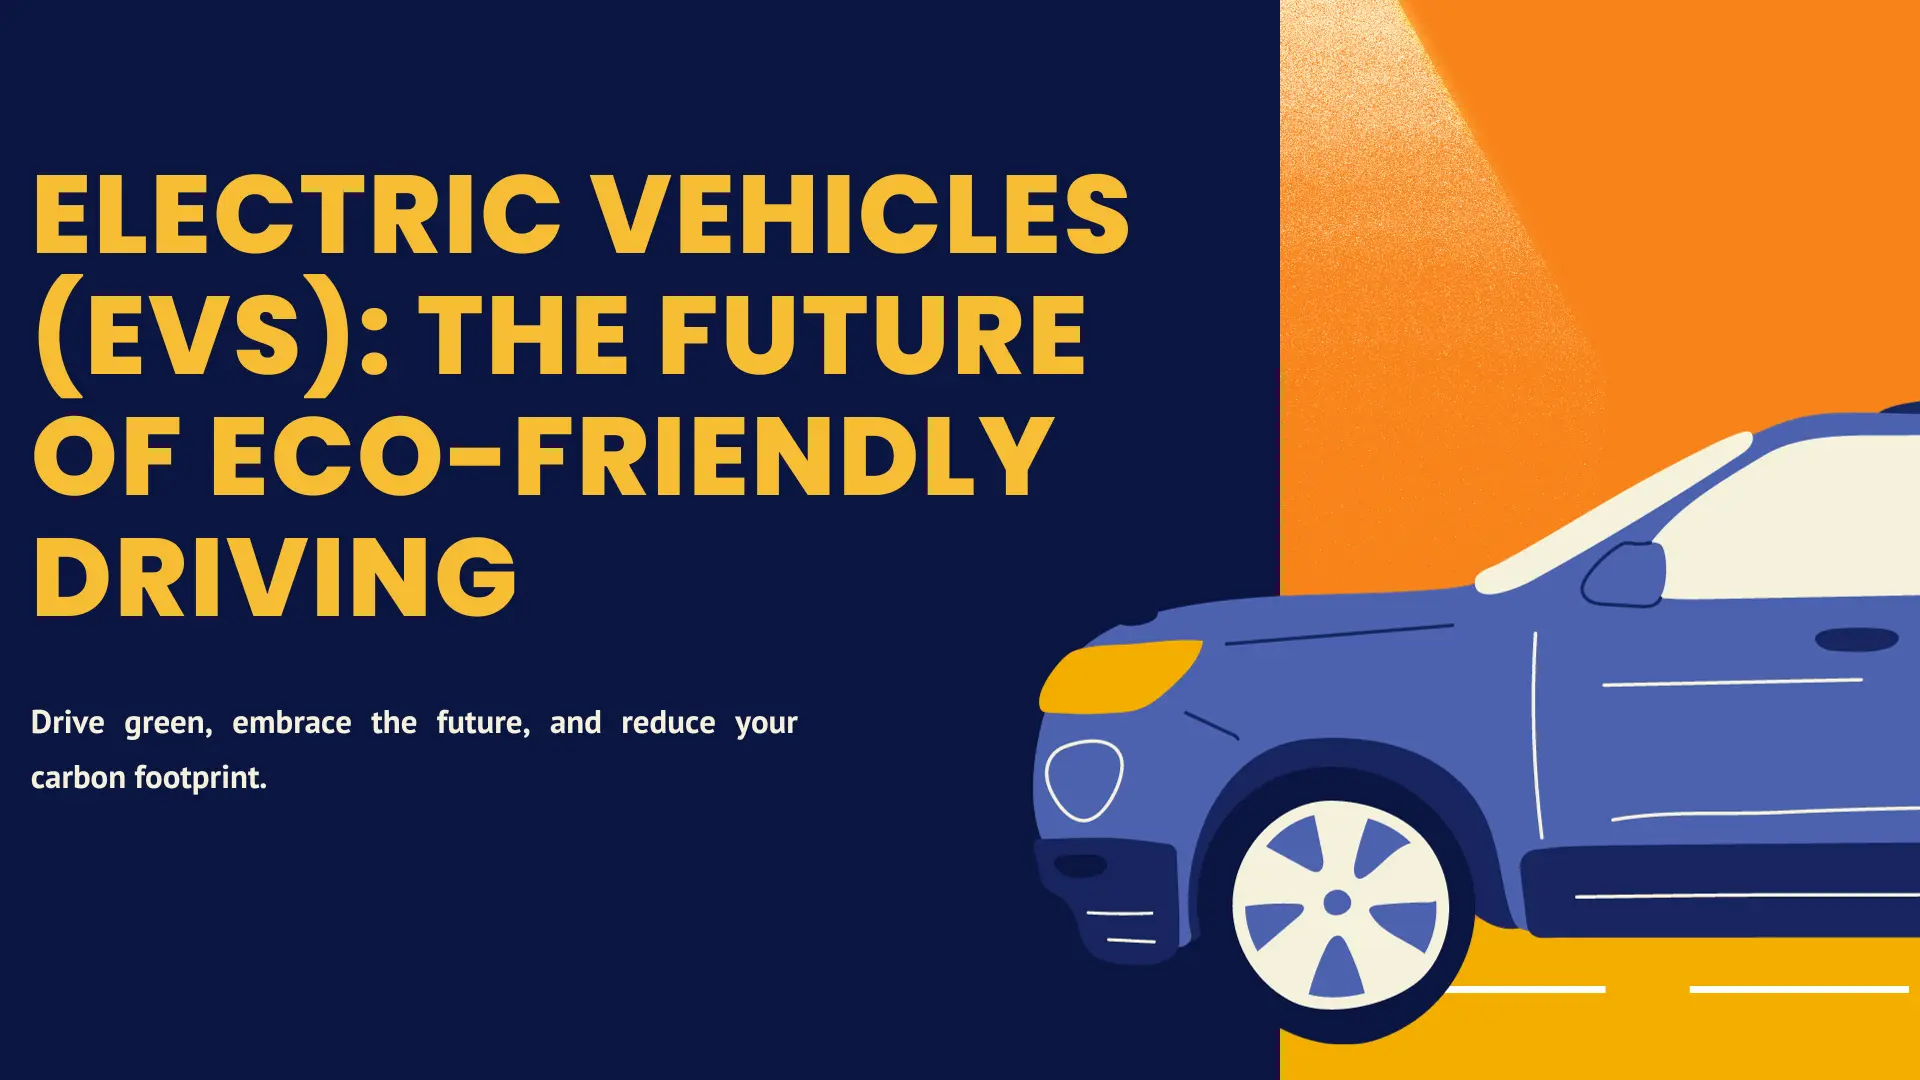 Electric Vehicles (EVs) The Future of Eco-Friendly Driving​